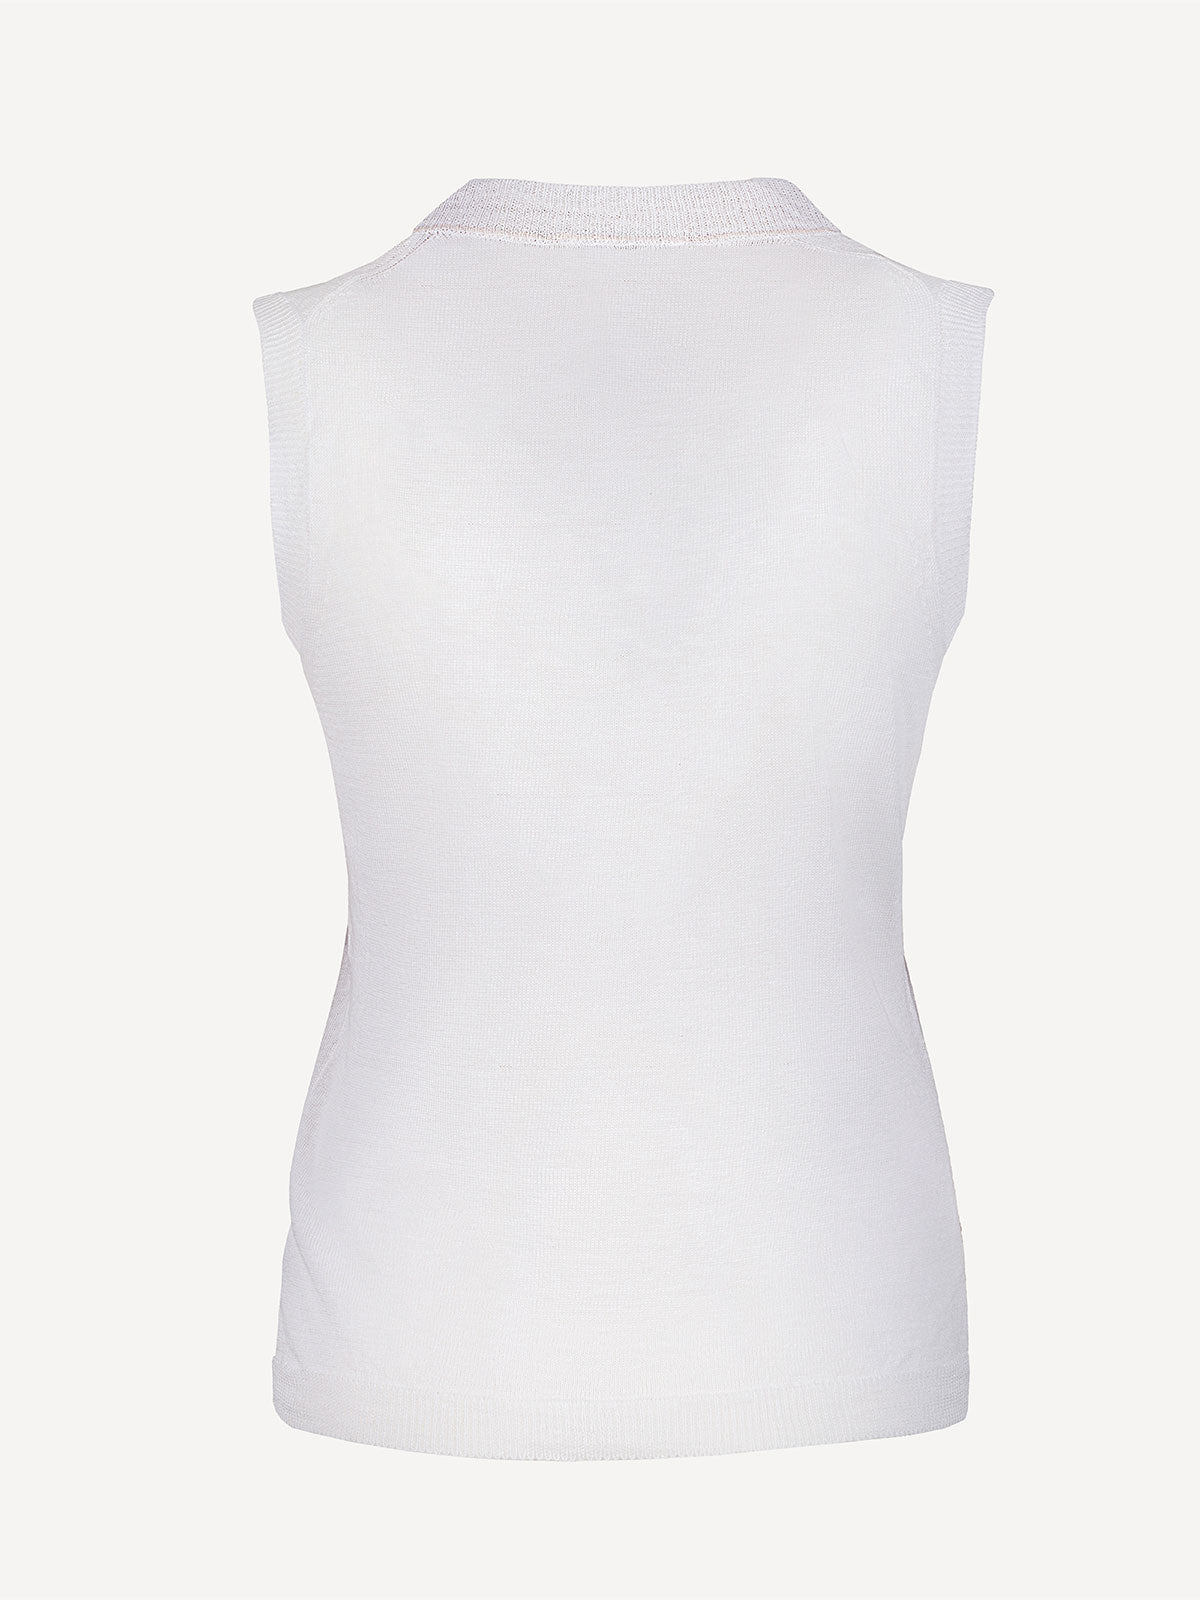 Top St Barth 100 Capri White and pink linen top back